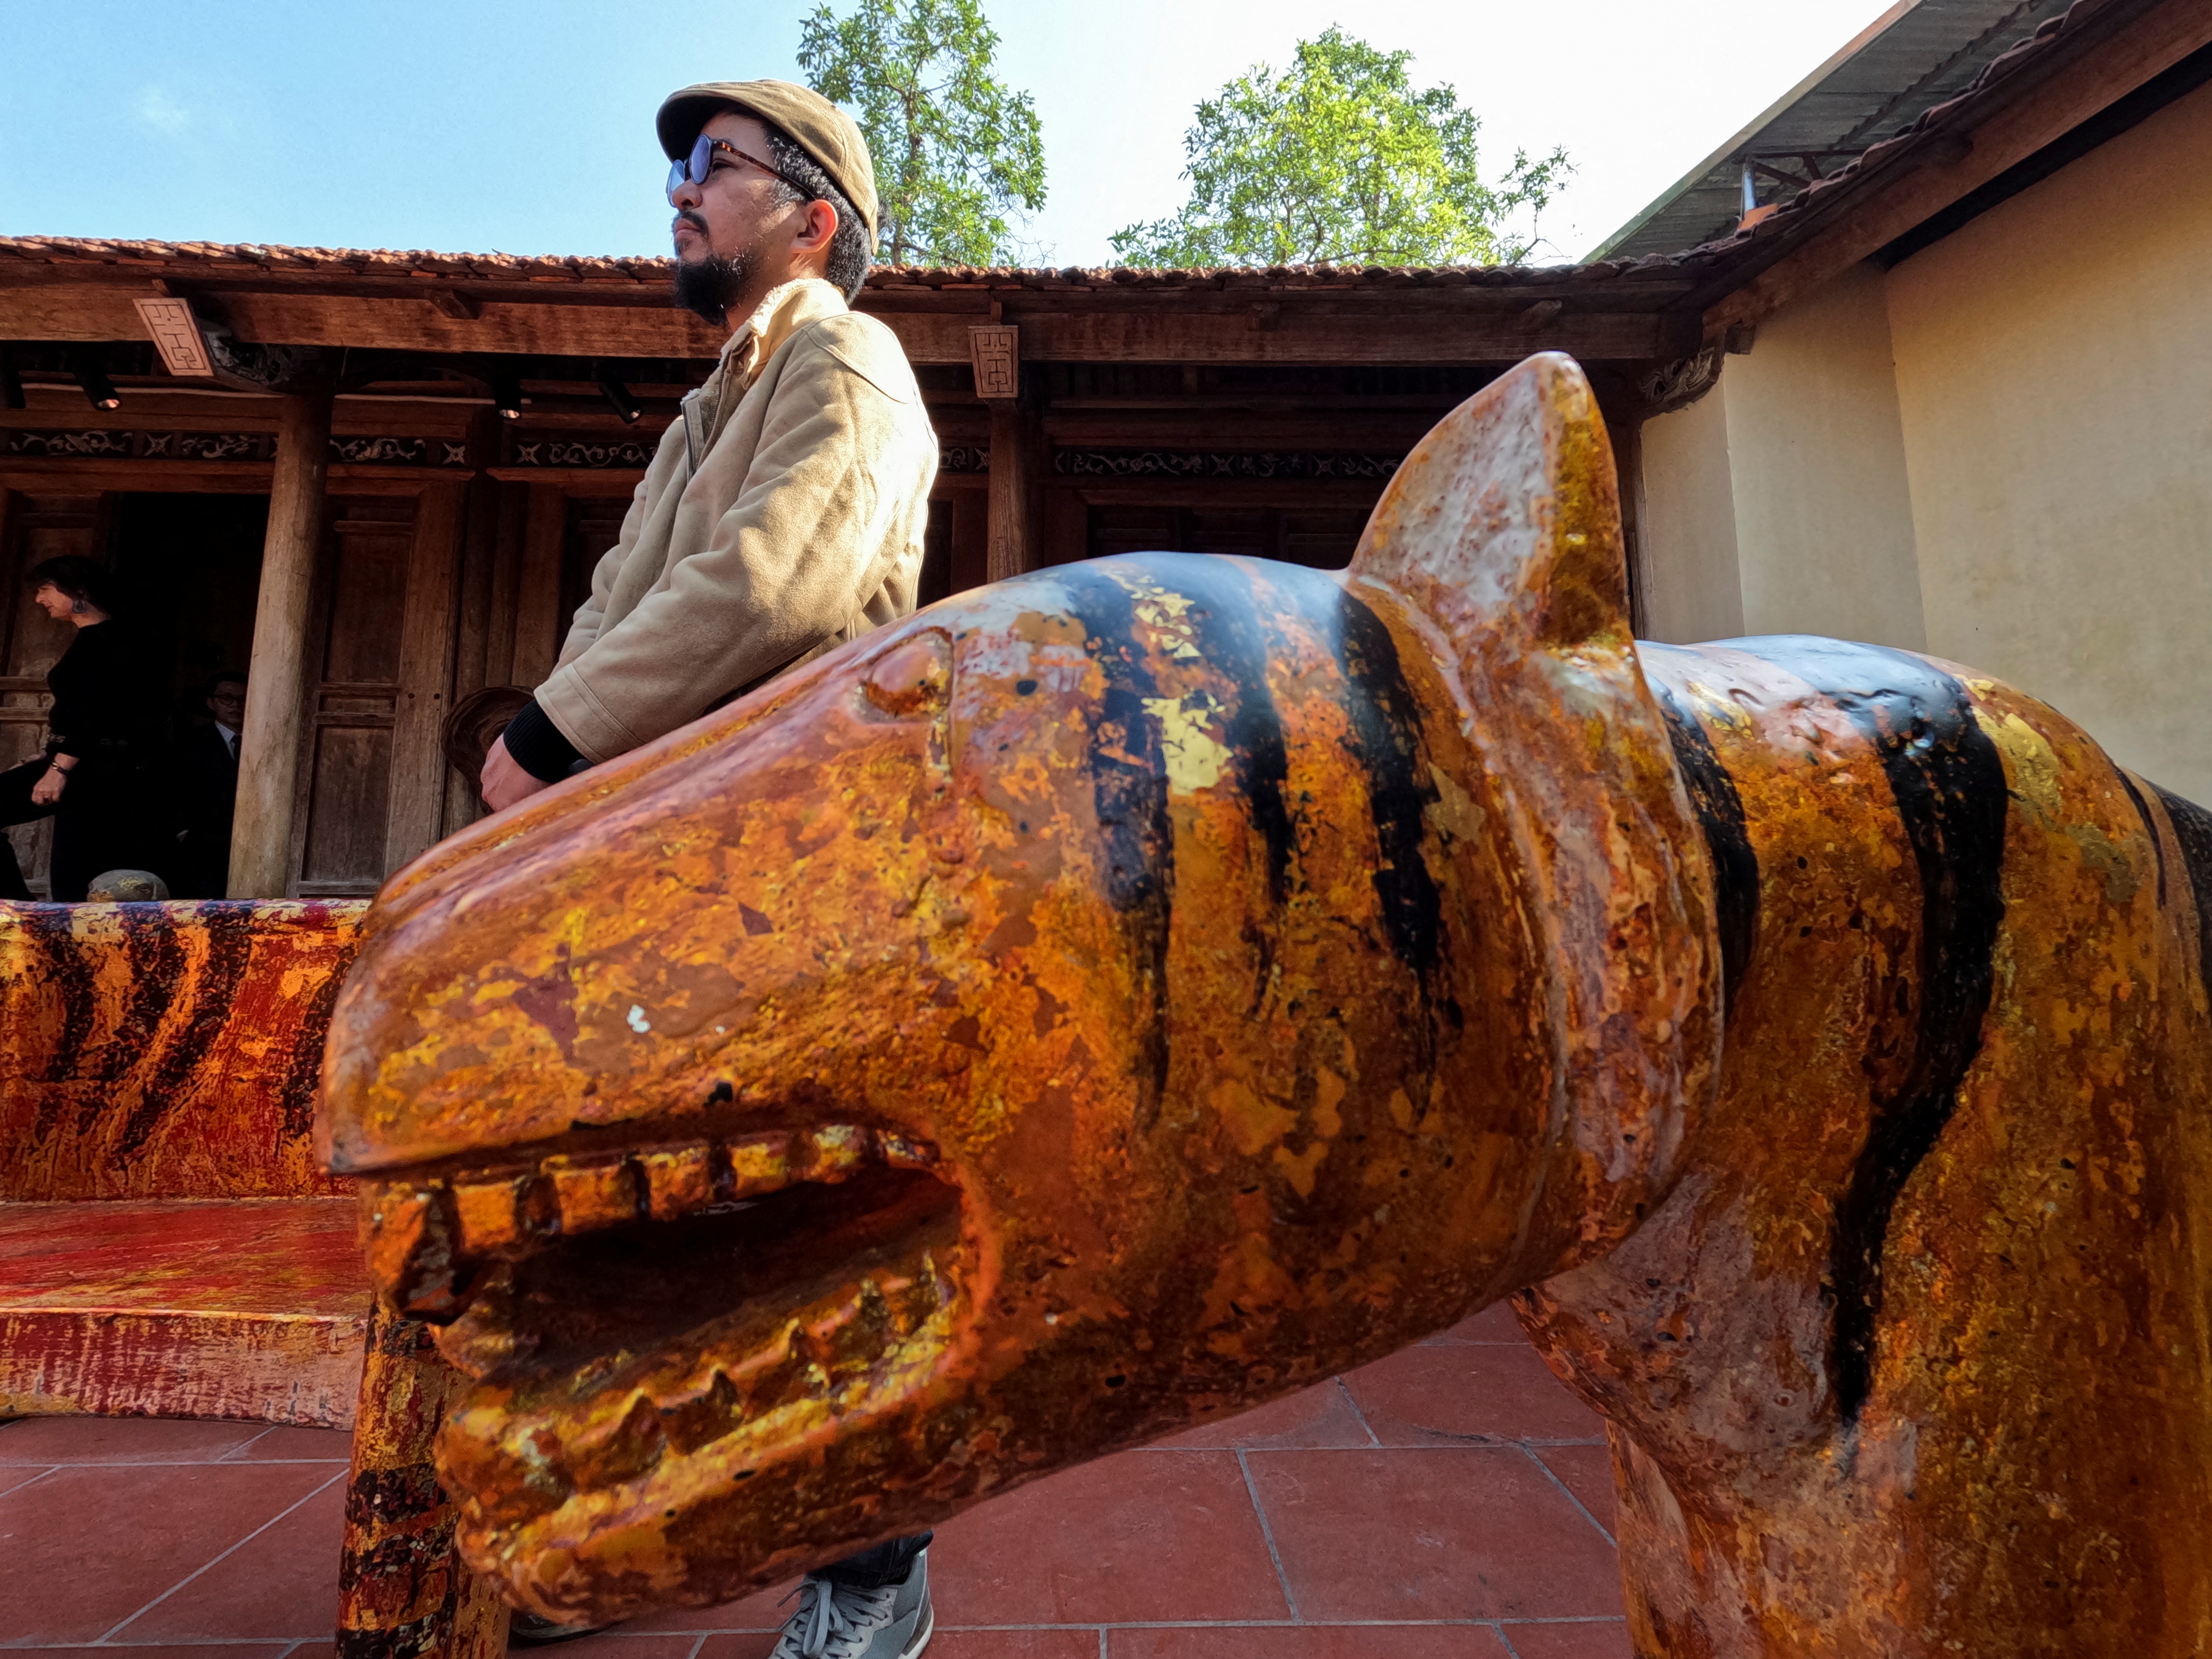 Nguyen Tan Phat stands in his yard with his Tiger carving works ahead of the Lunar New year in Hanoi